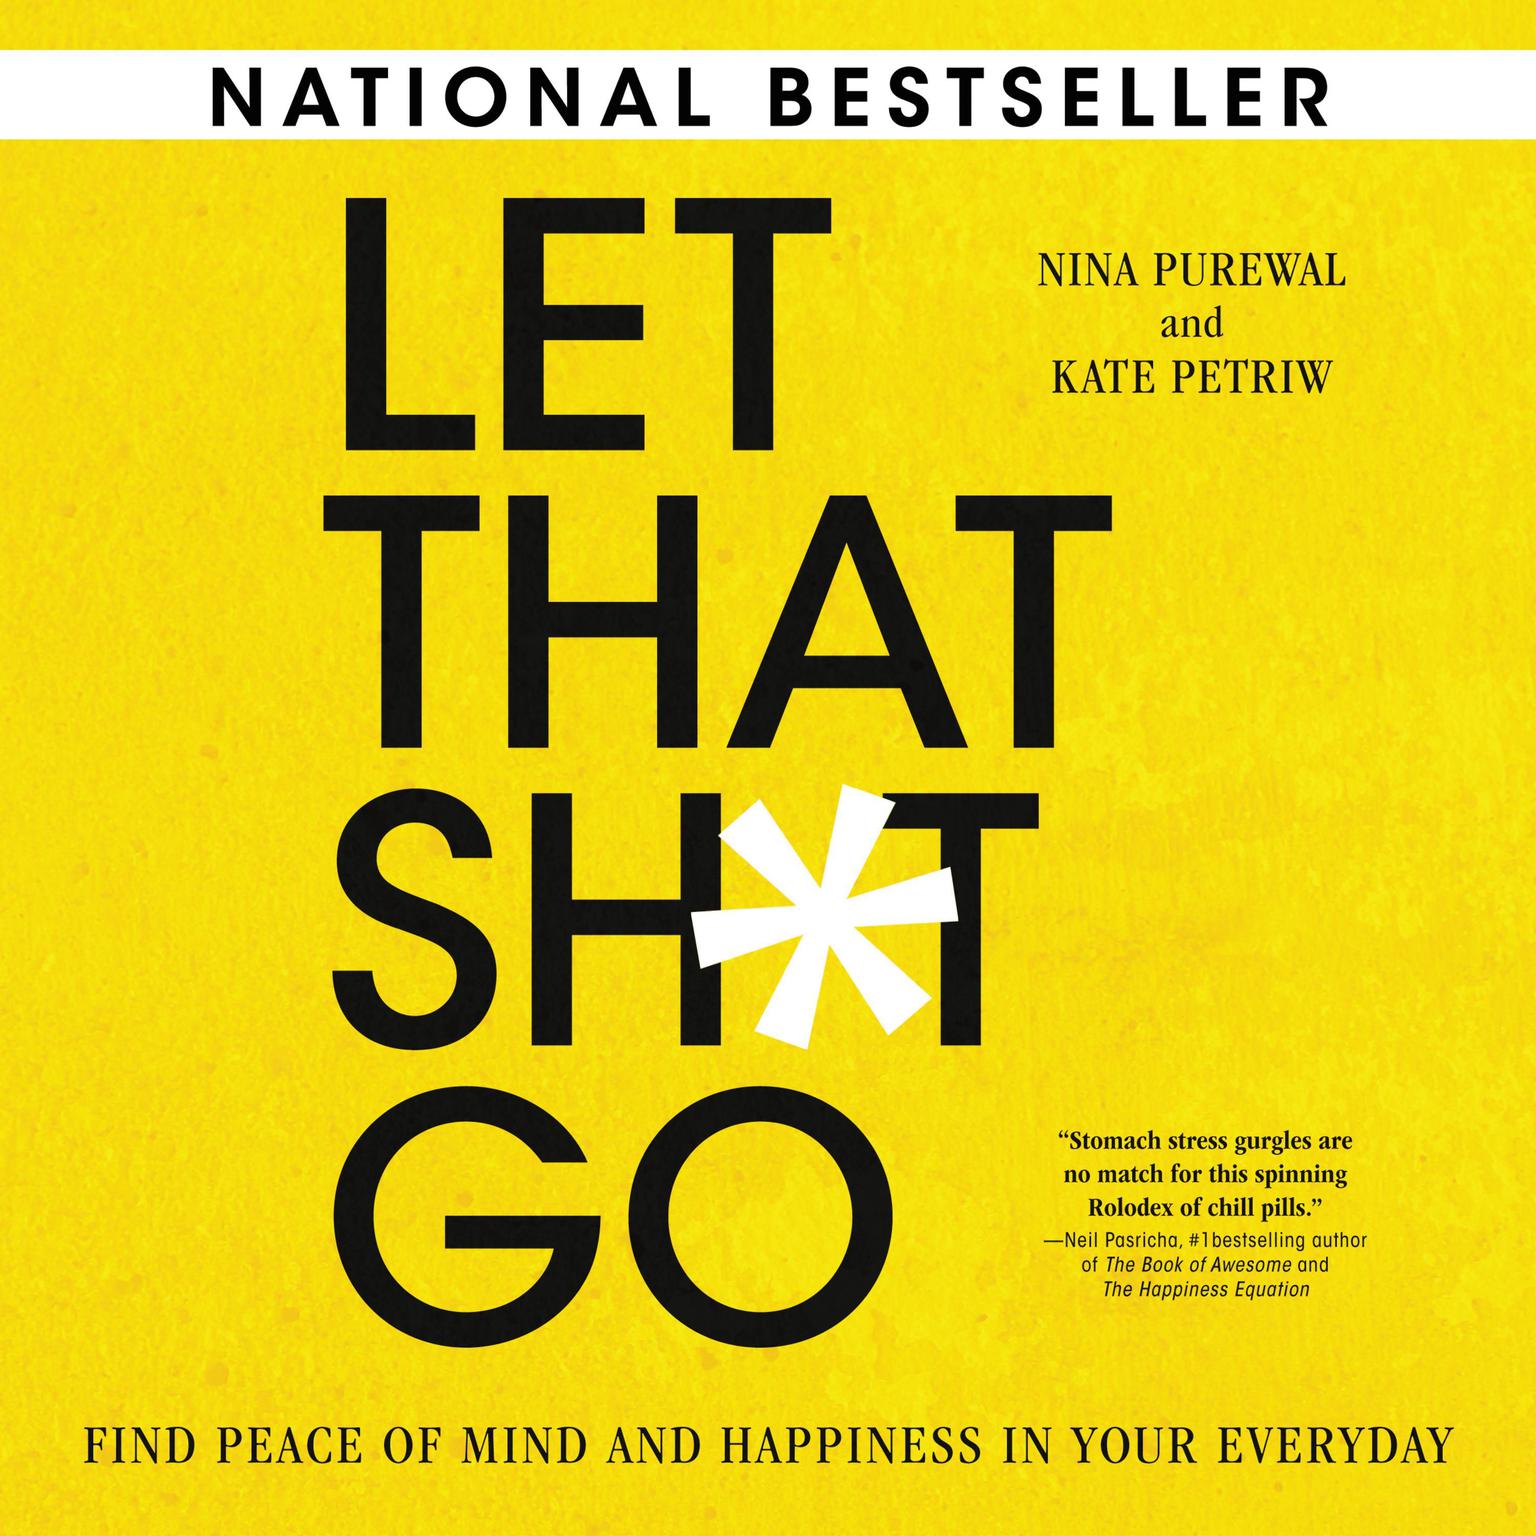 Let That Sh*t Go: Find Peace of Mind and Happiness in Your Everyday Audiobook, by Kate Petriw